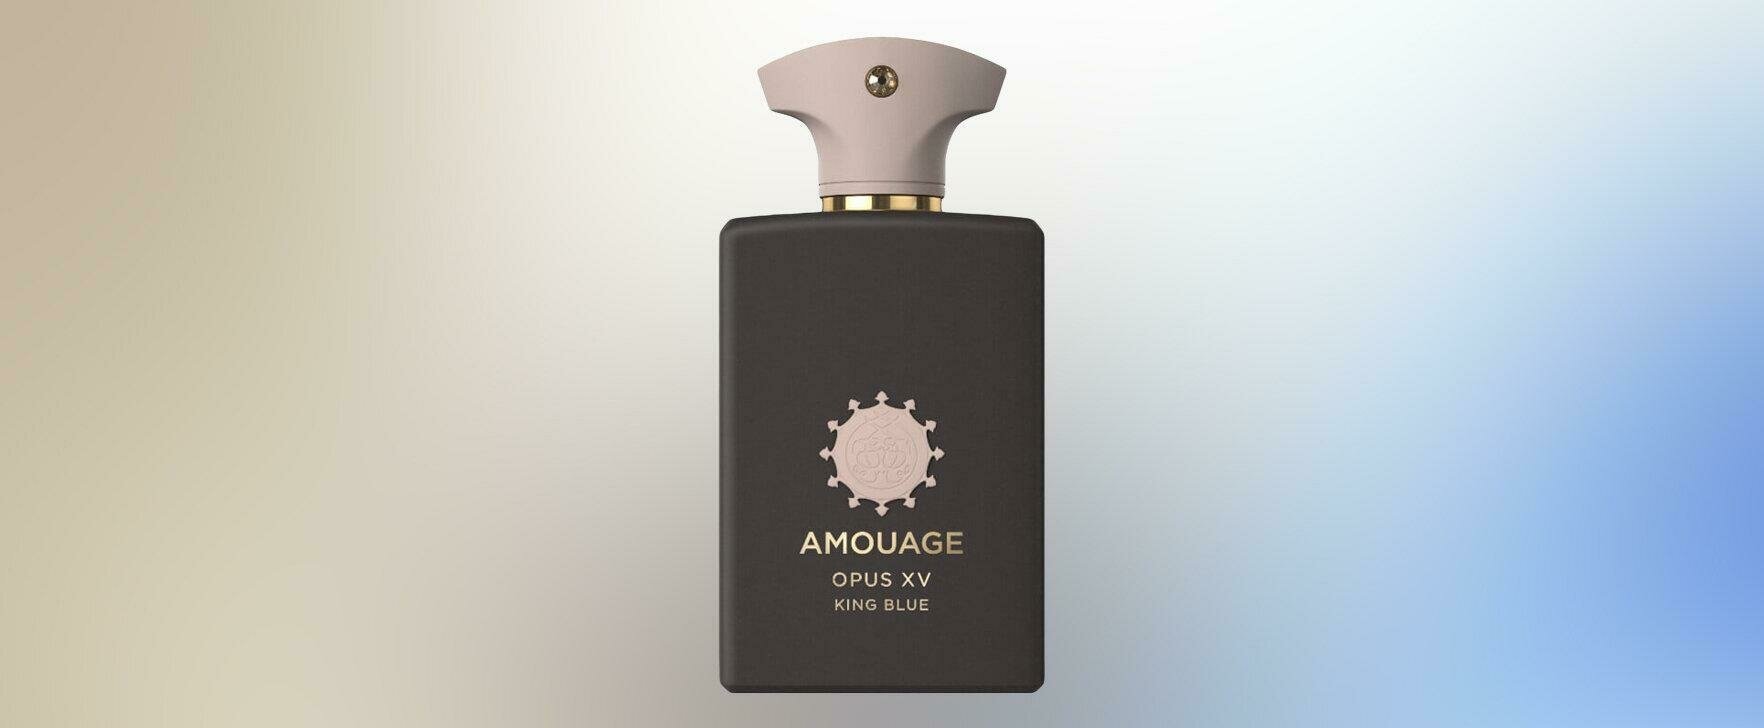 The New Olfactory Work of the Fragrance Library: Opus XV - King Blue by Amouage